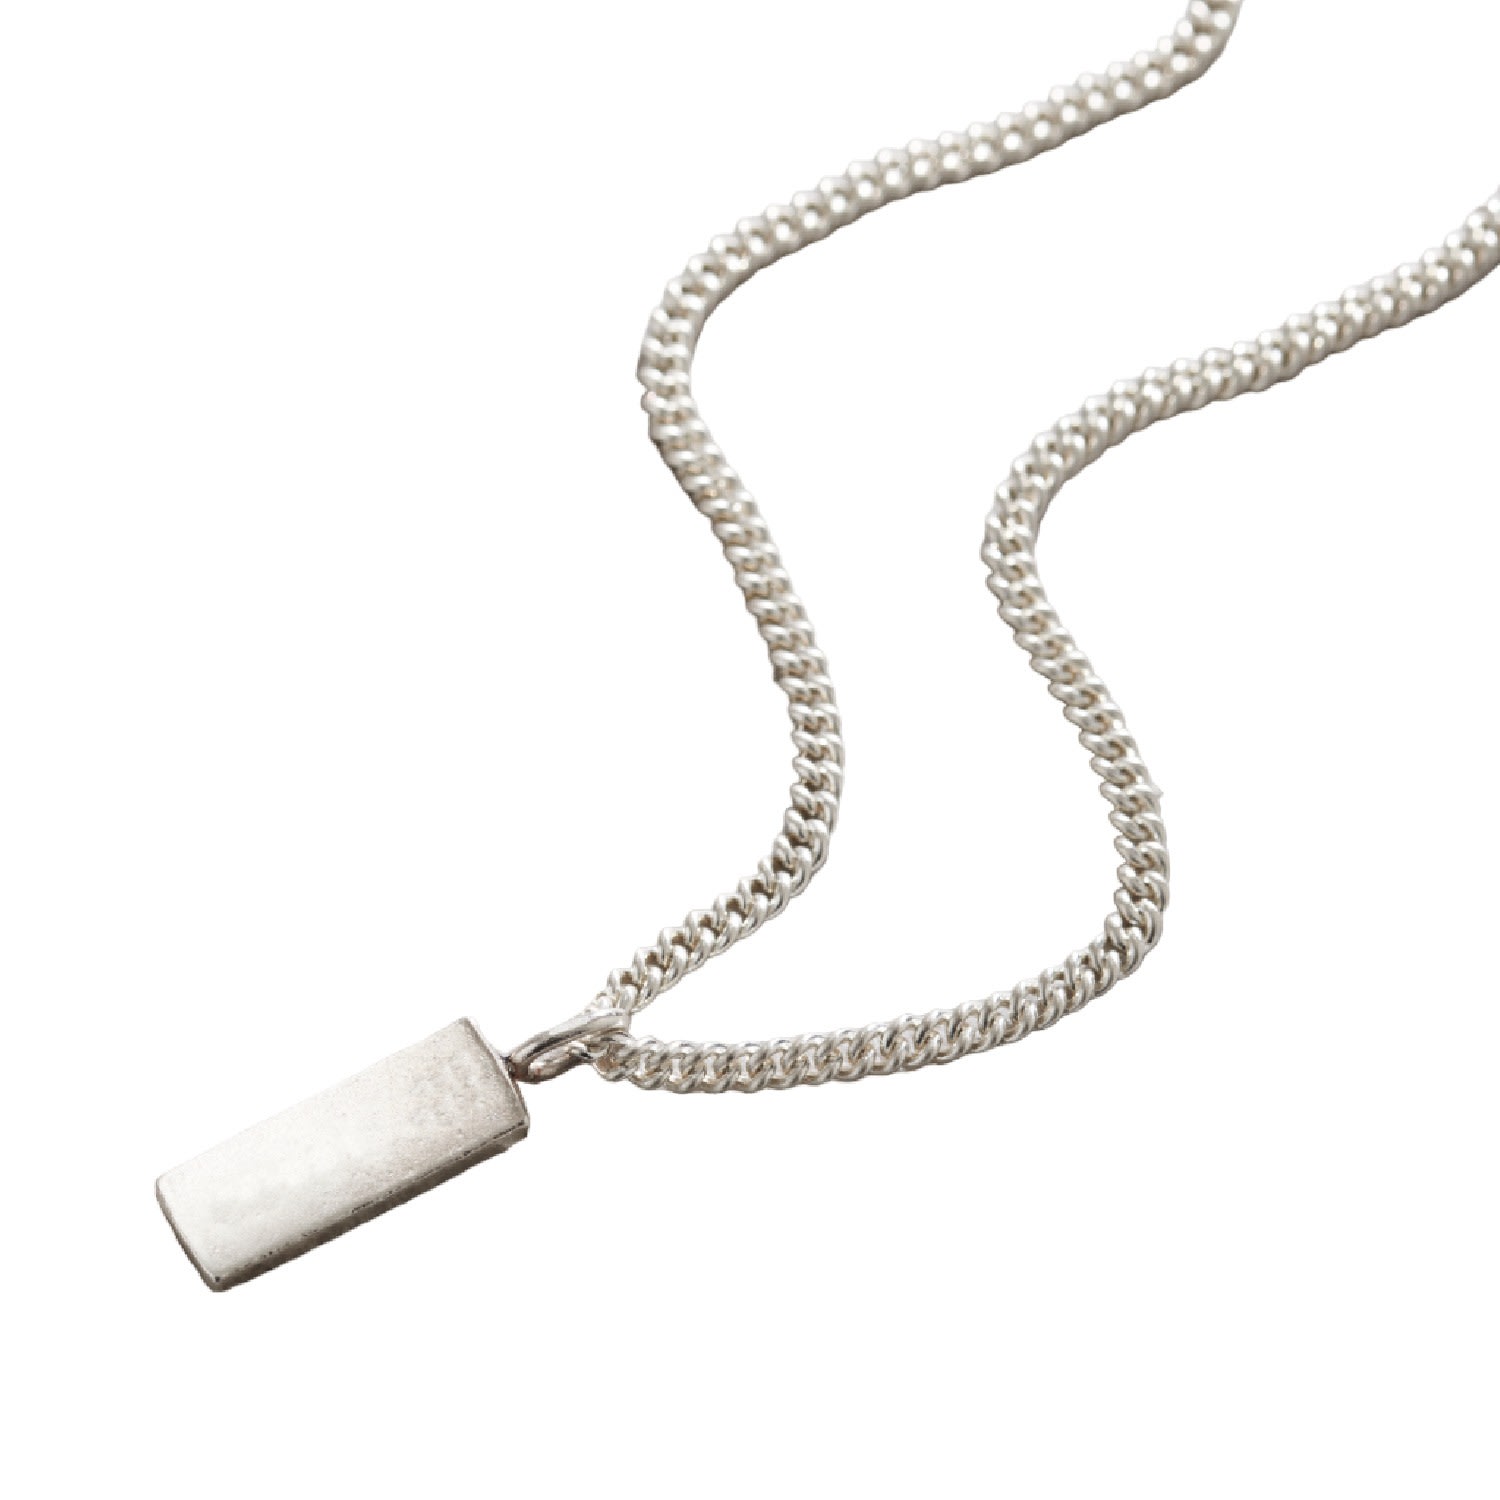 Posh Totty Designs Mens Luxury Sterling Silver Tag Necklace